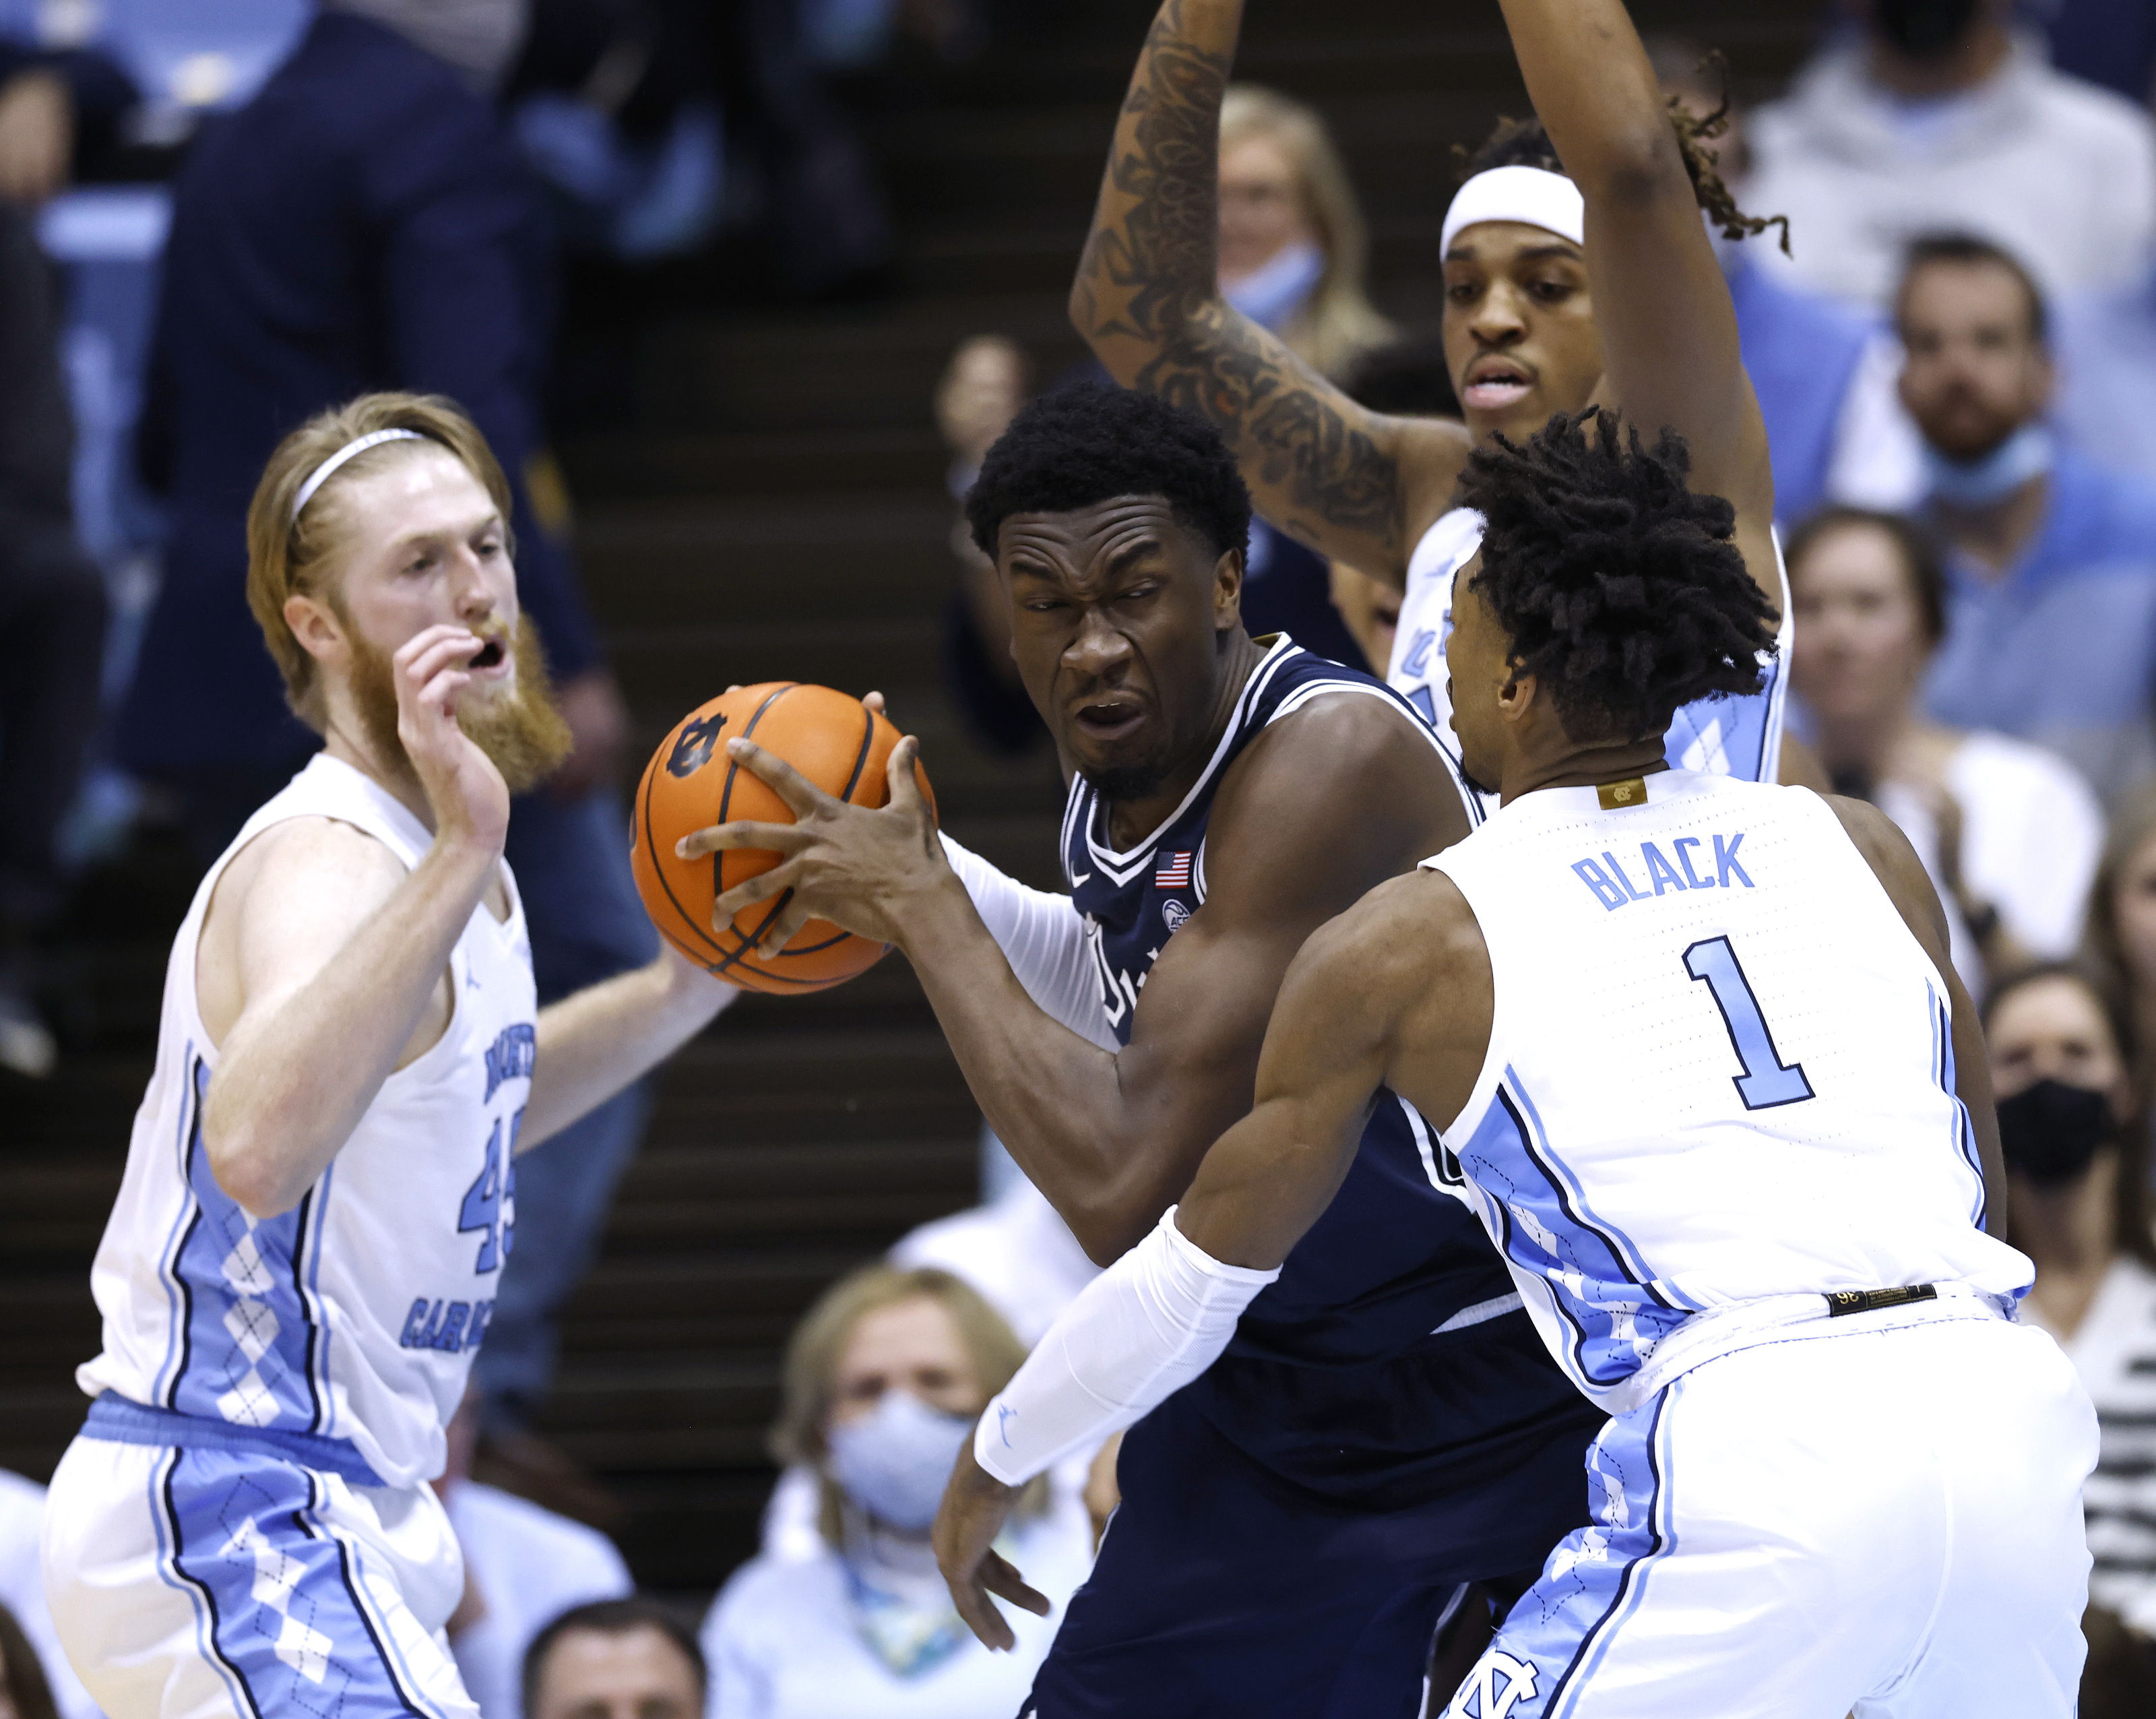 UNC Basketball Duke/UNC most expensive game on record